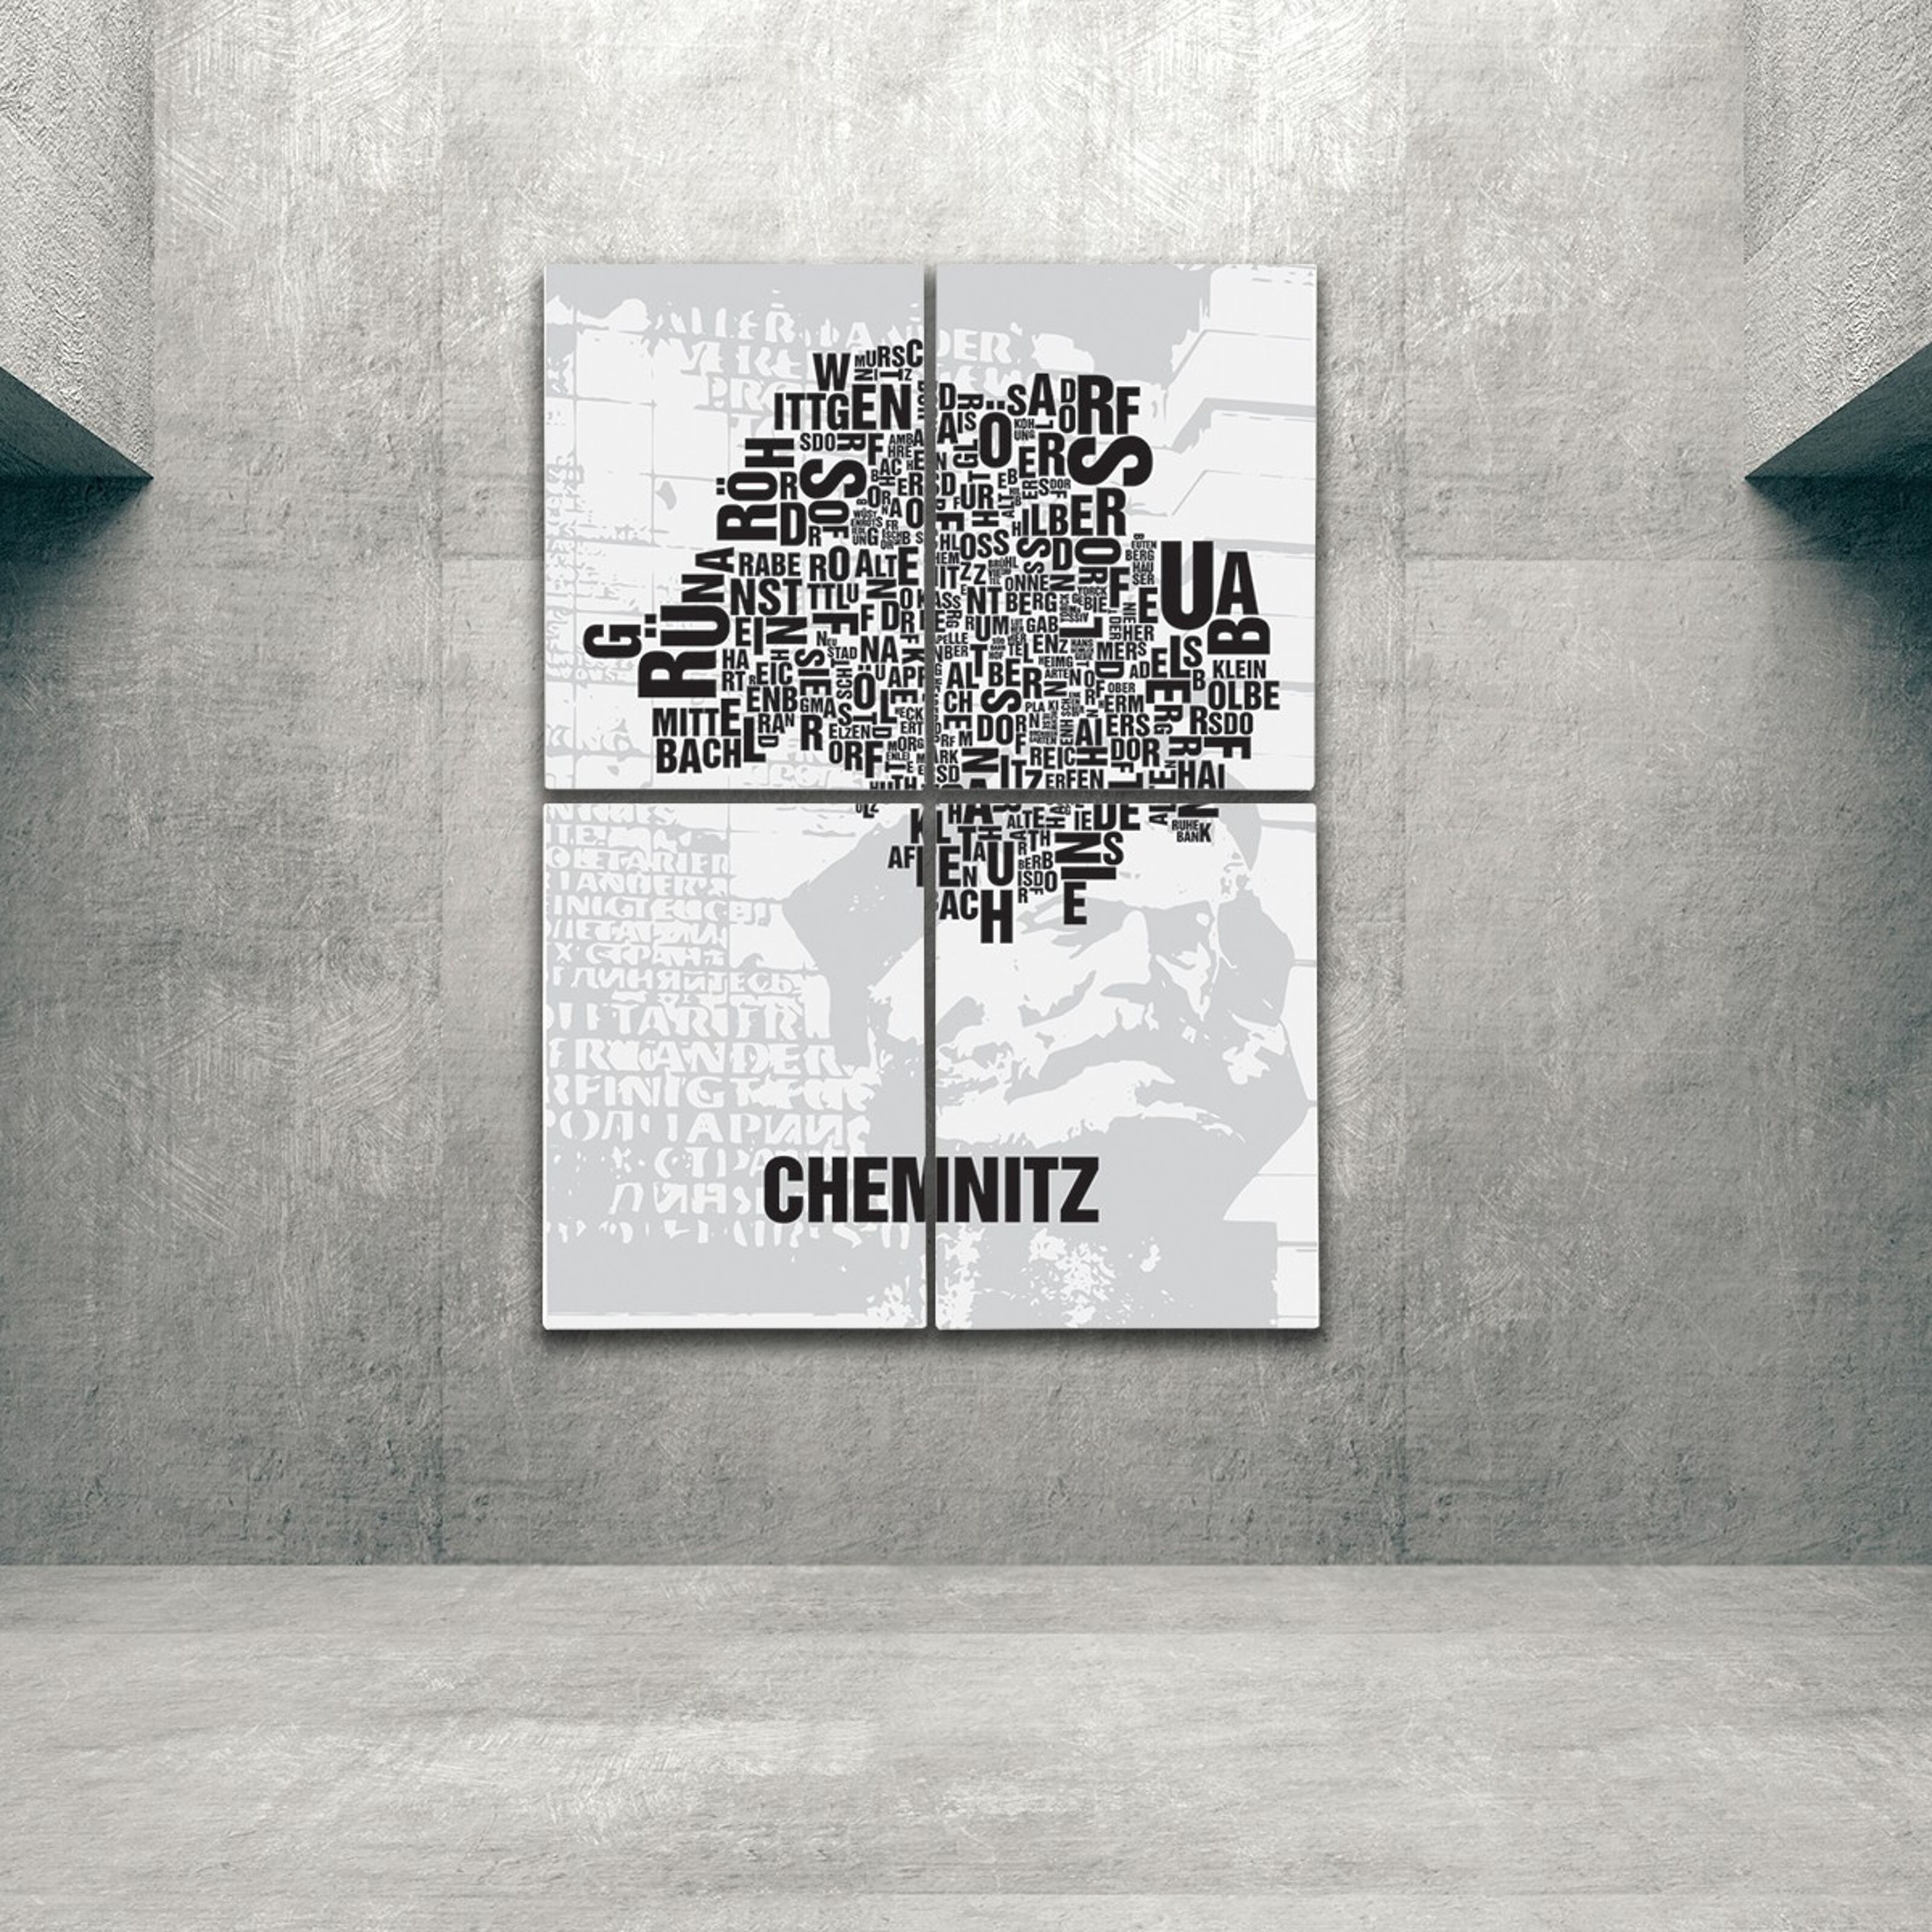 Chemnitz letters - 140x200cm-as-4-part-stretcher wholesale saw in party of Place Nischel Buy of front